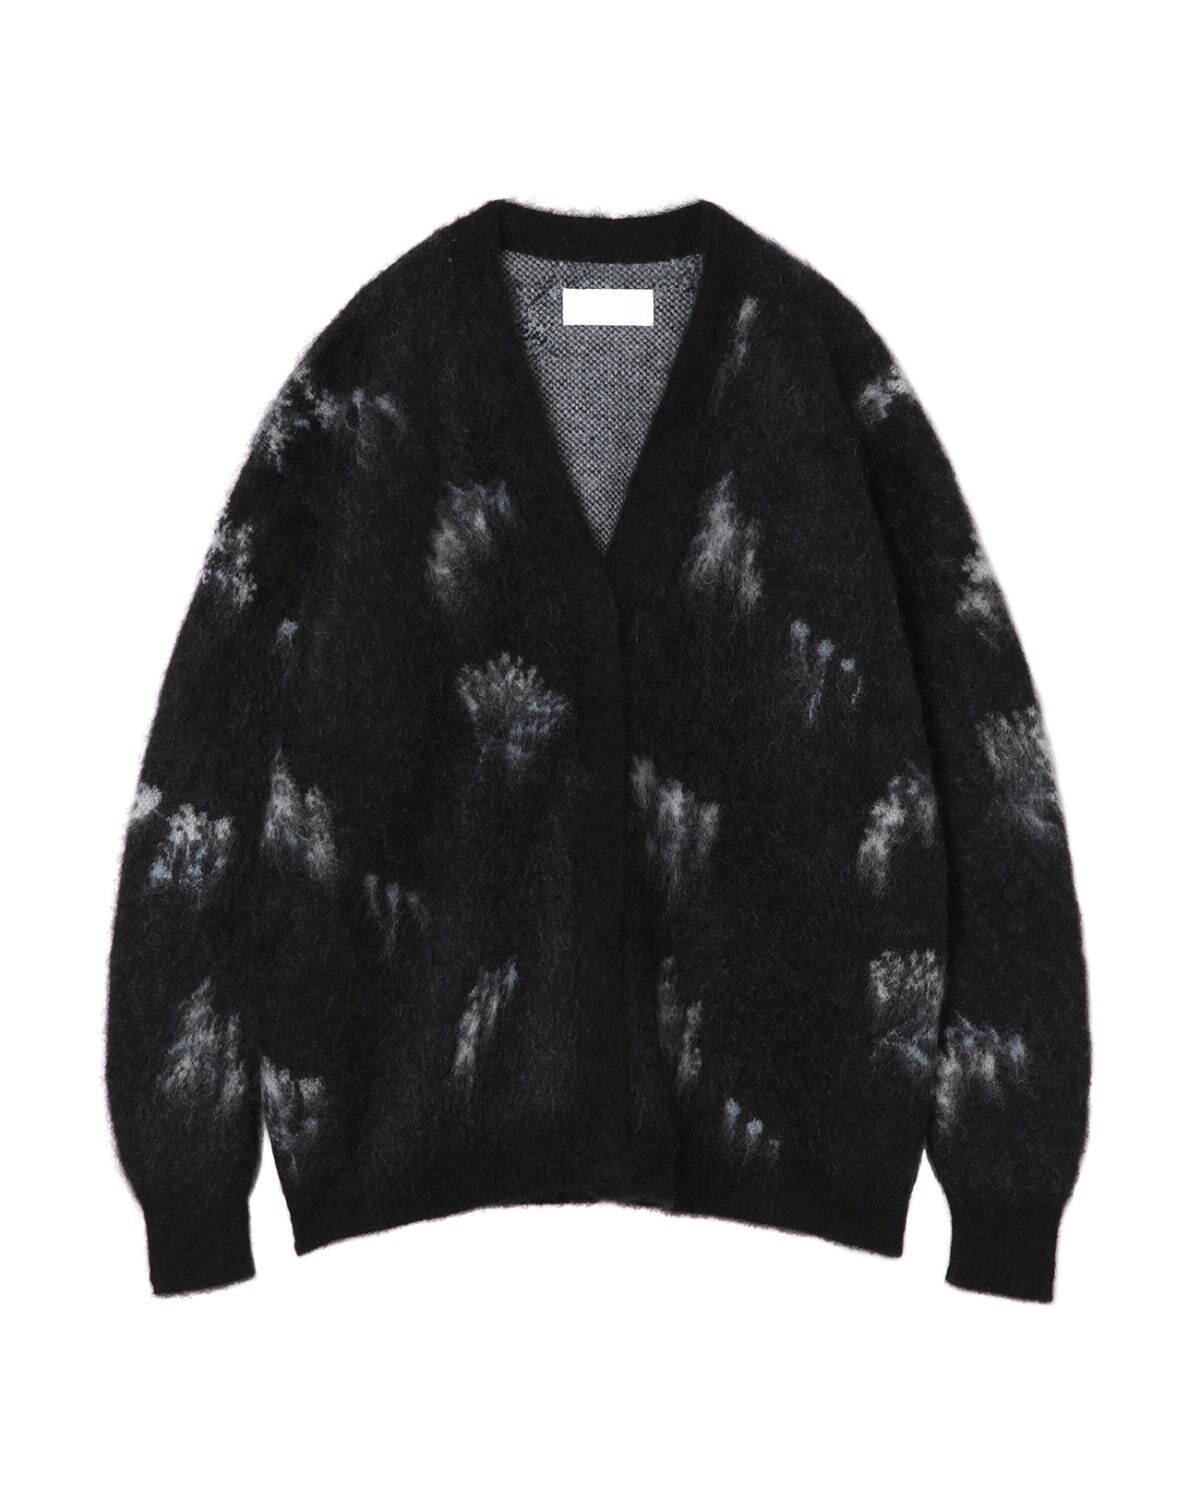 Wool Mohair Floral Knitted Cardigan 82,500円